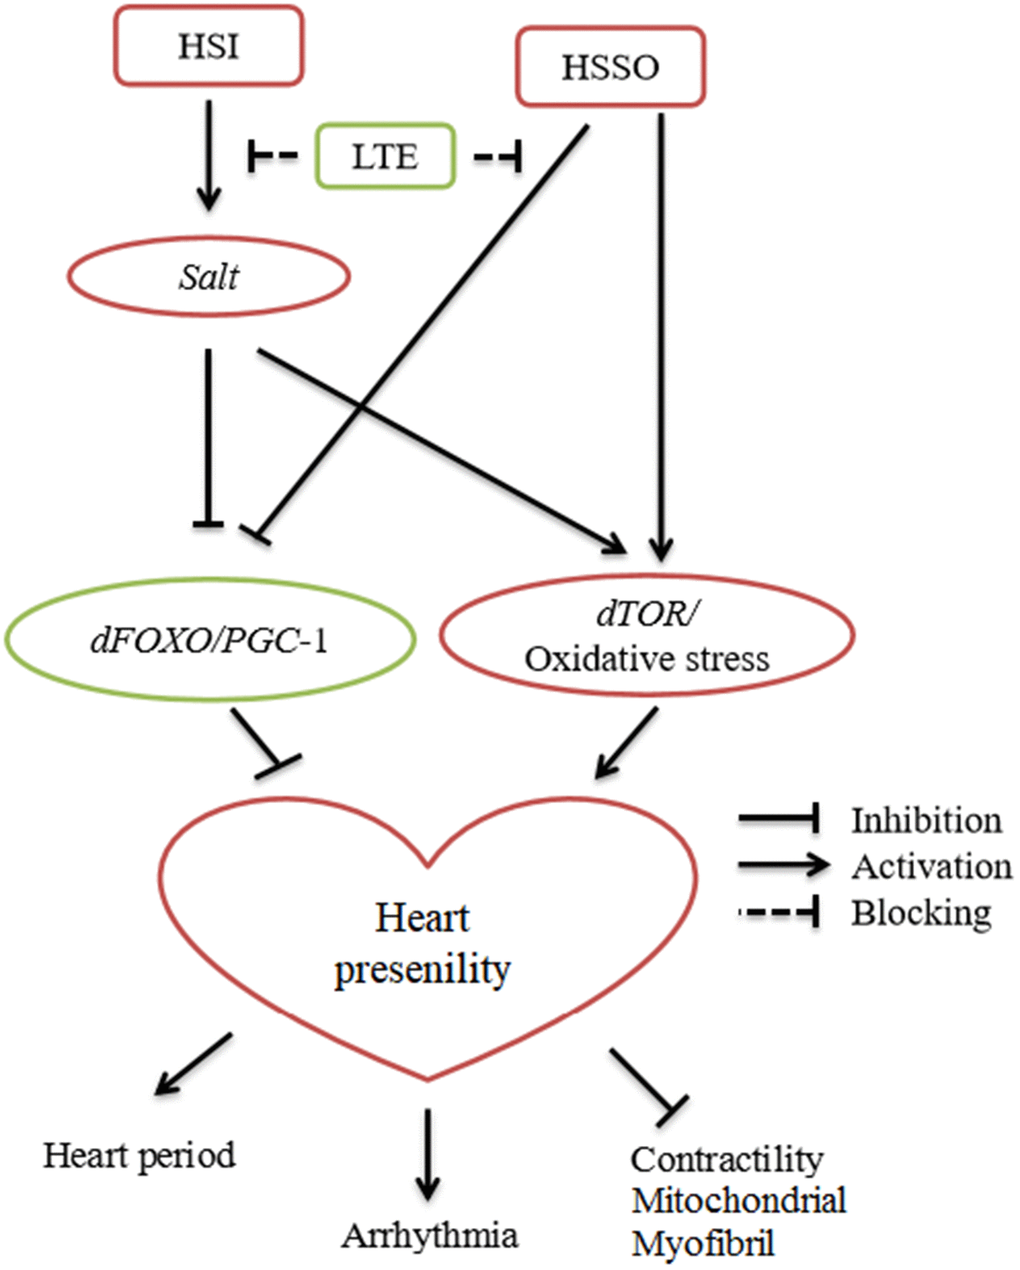 Current evidences suggested the relationship between high-salt intake (HSI), exercise training (ET), heart salt specific overexpression (HSSO), and heart presenility.